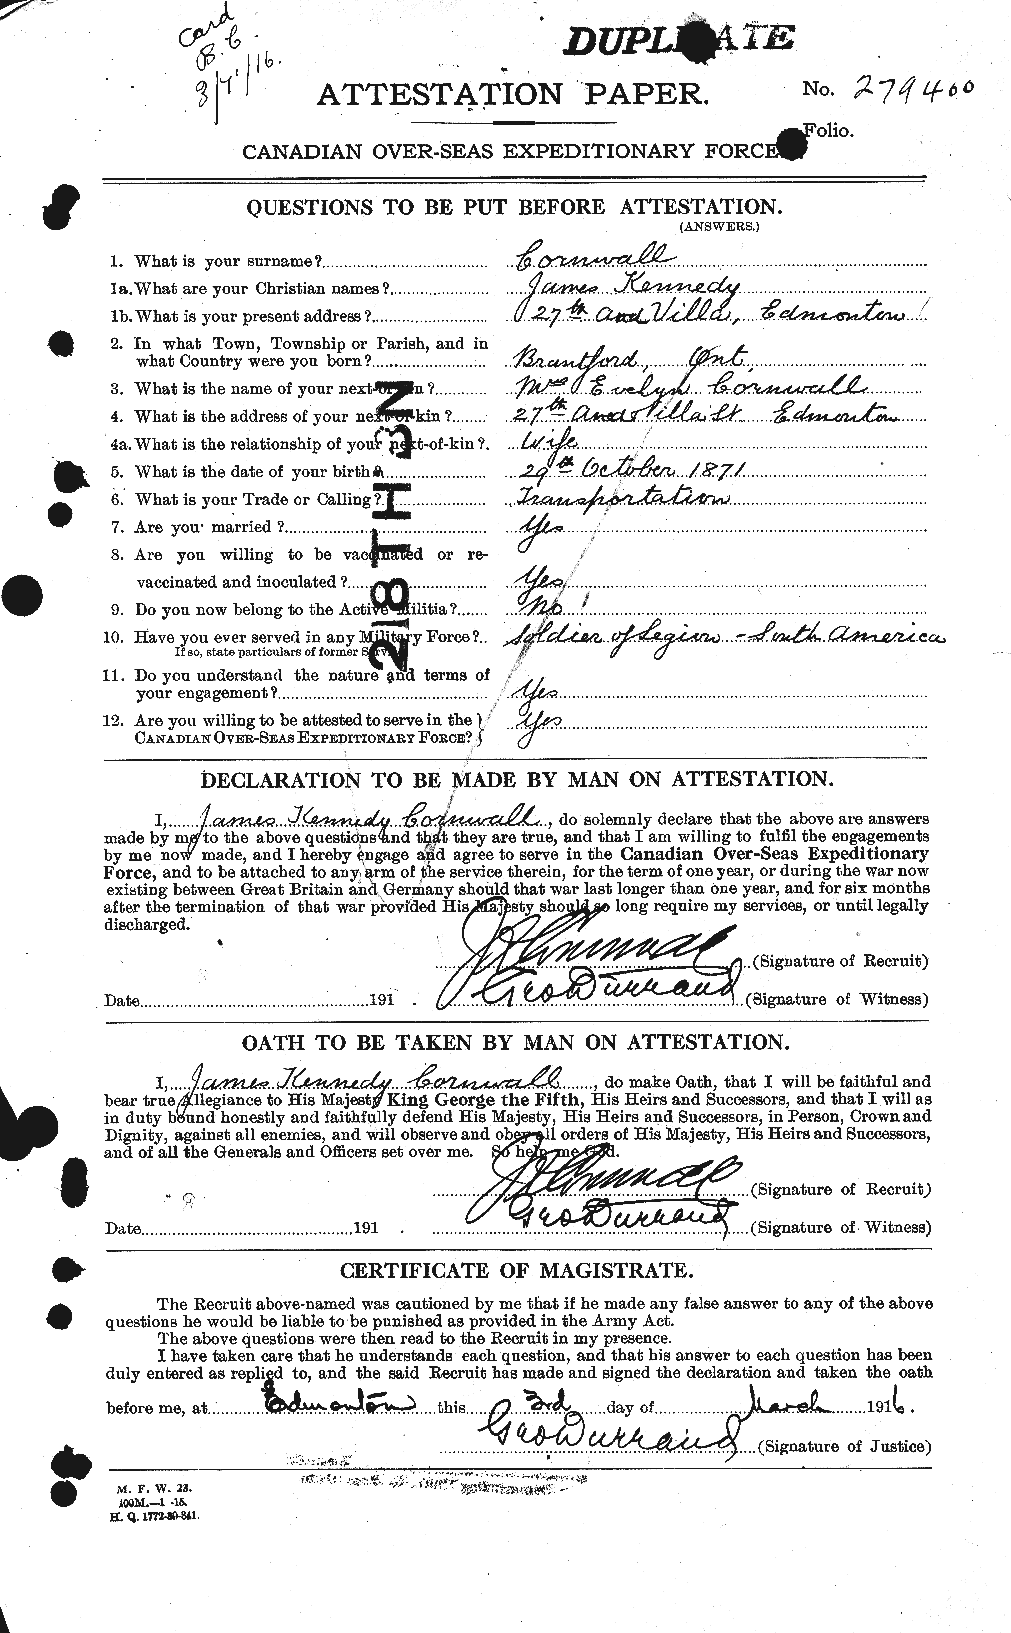 Personnel Records of the First World War - CEF 055391a